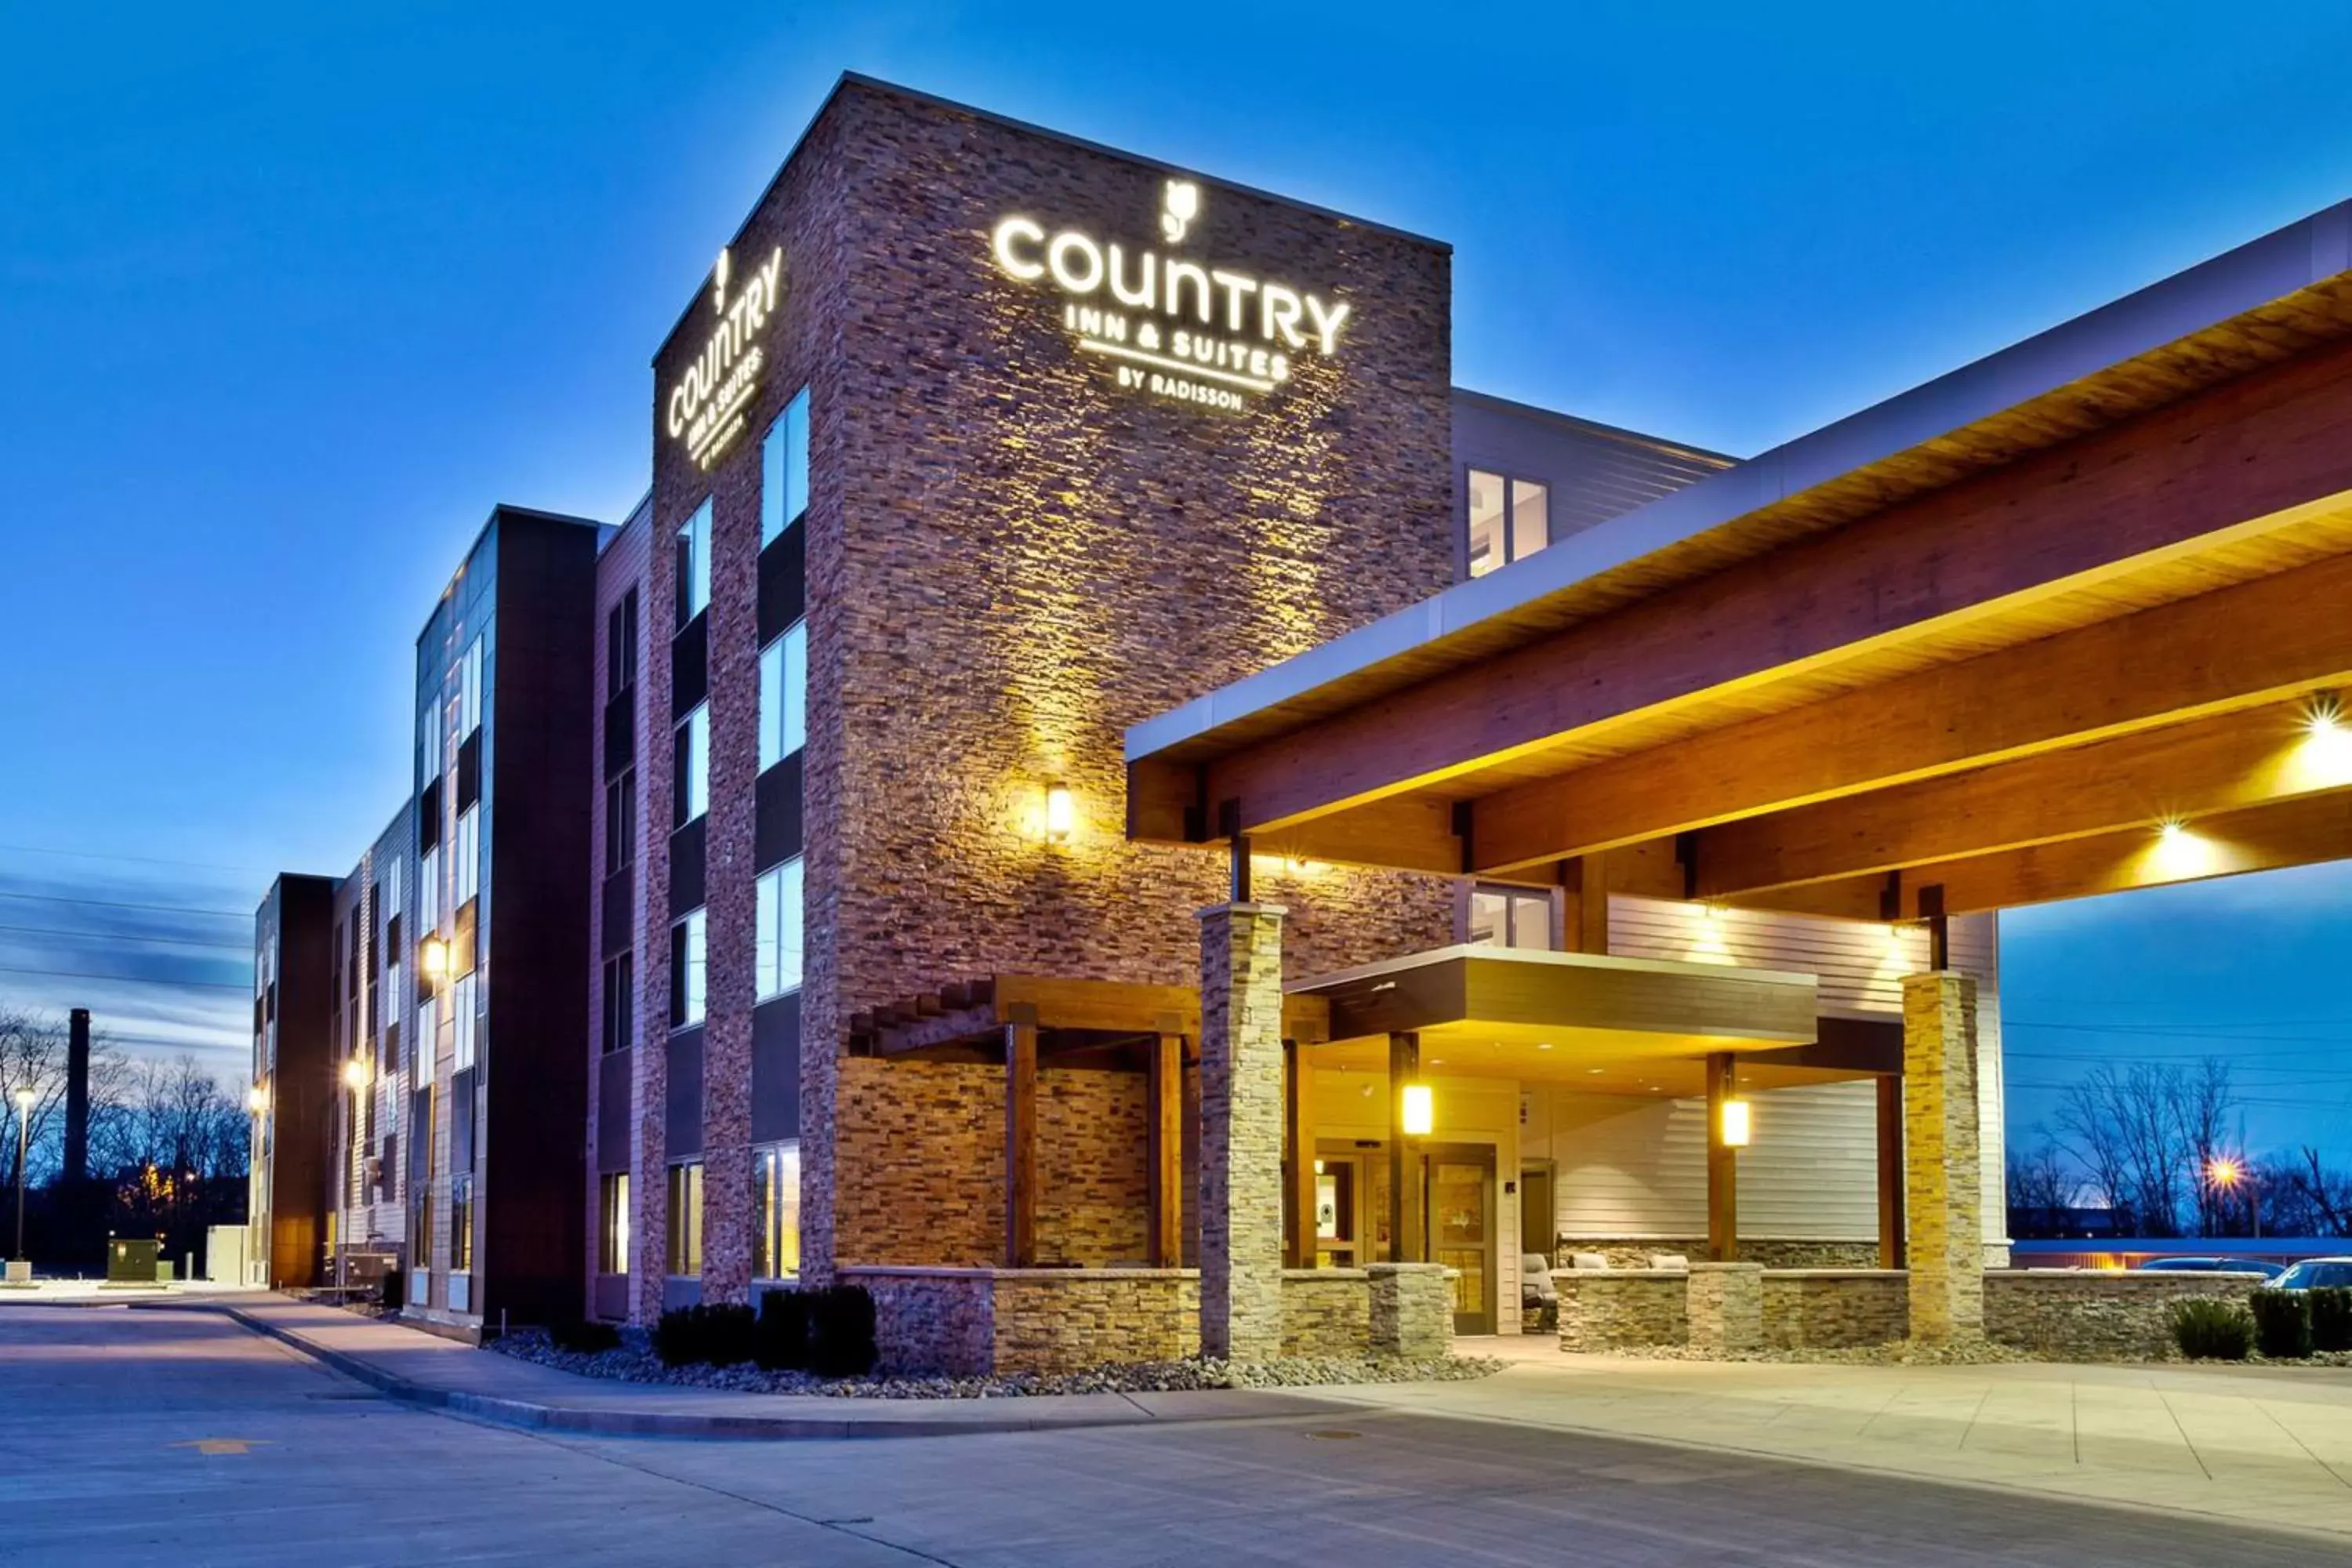 Property building in Country Inn & Suites by Radisson, Springfield, IL